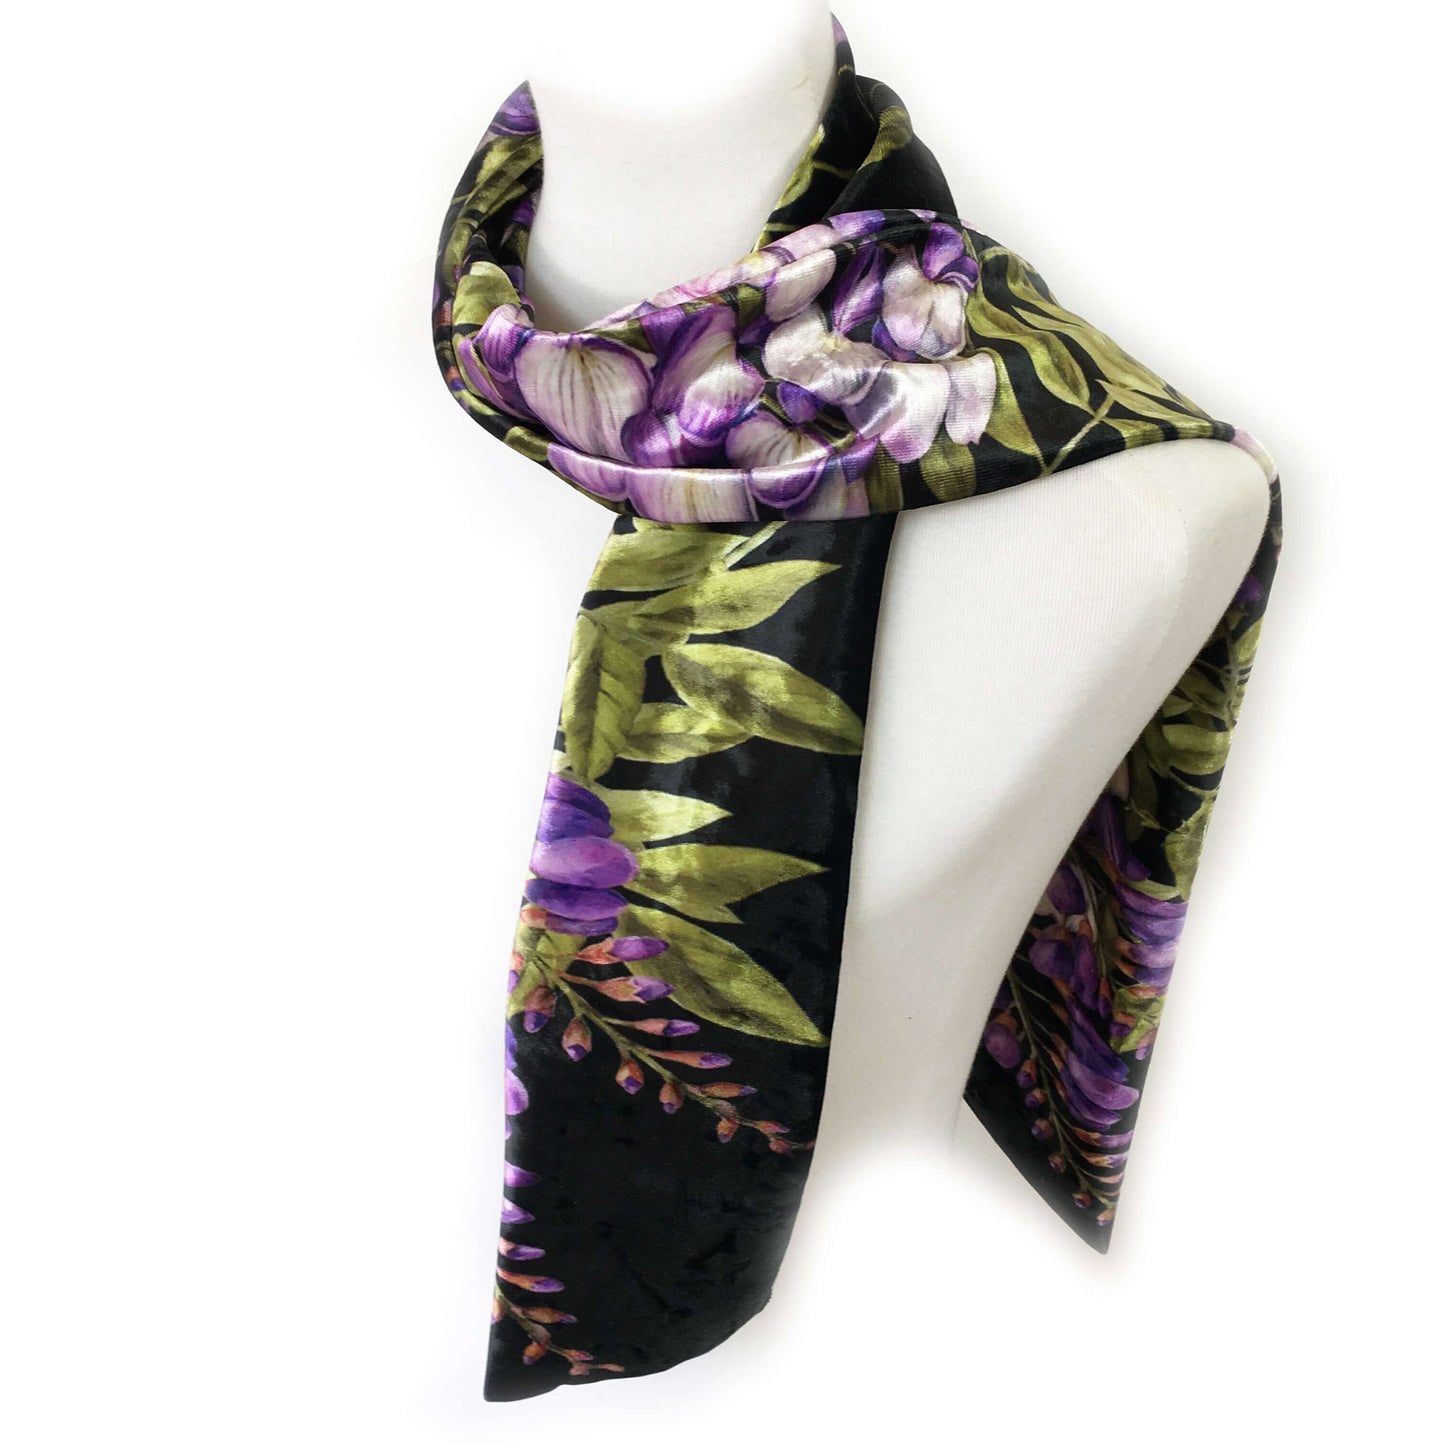 Wisteria Velour Scarf, Womans Scarf, All season, Luminous Scarf, hand painted scarf, artist scarf, Wear all day or evening